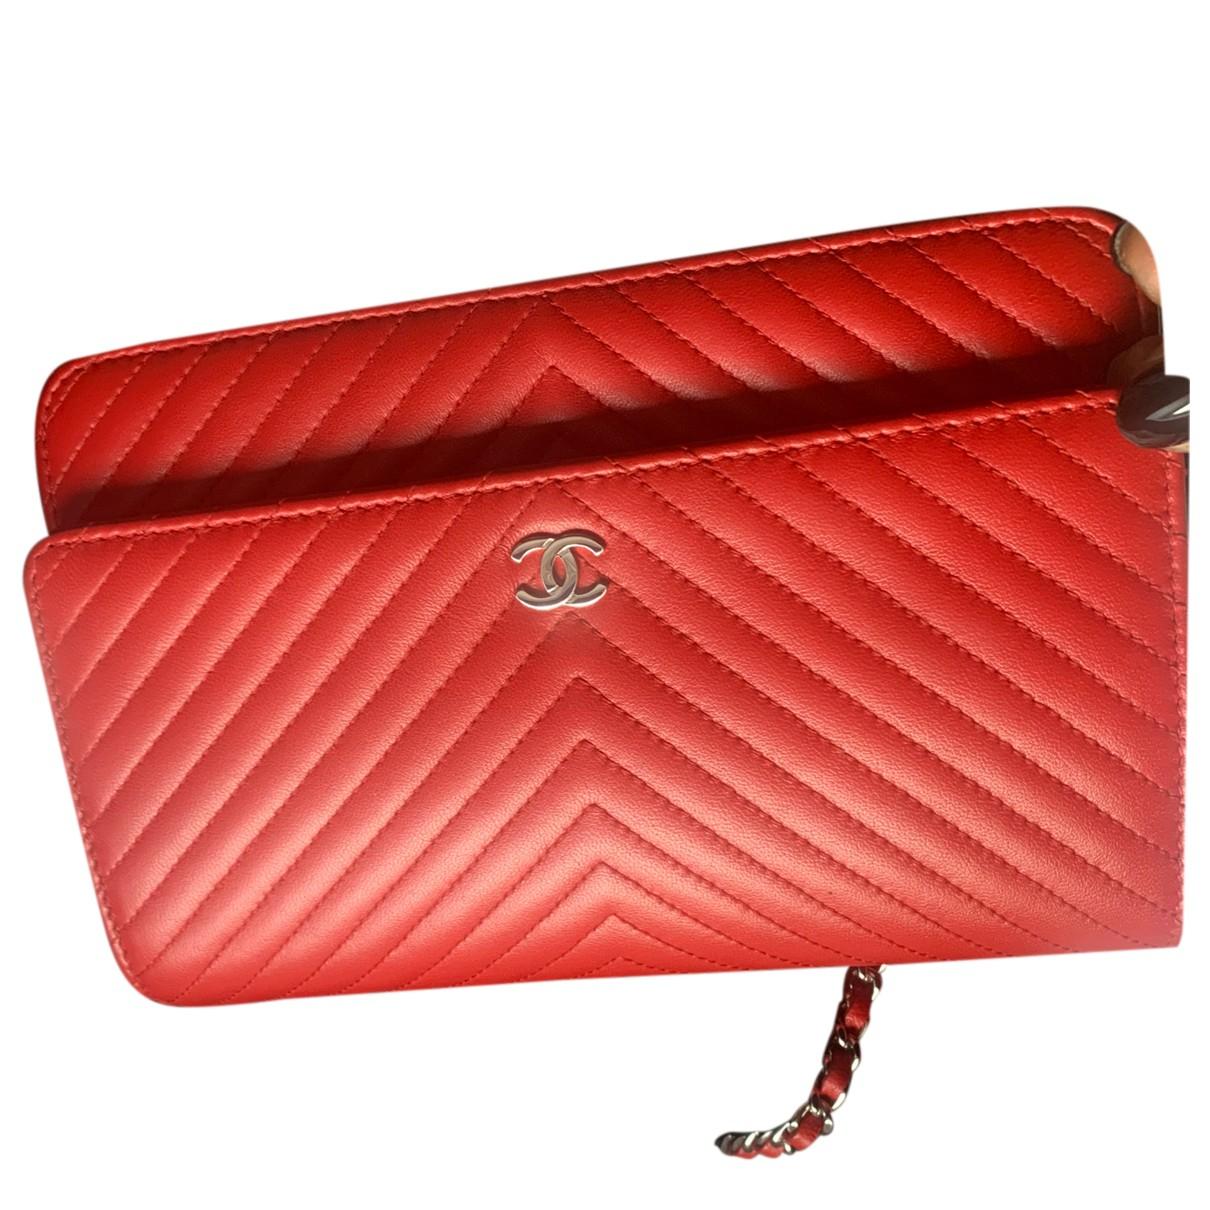 Wallet on chain leather crossbody bag Chanel Red in Leather - 21141425